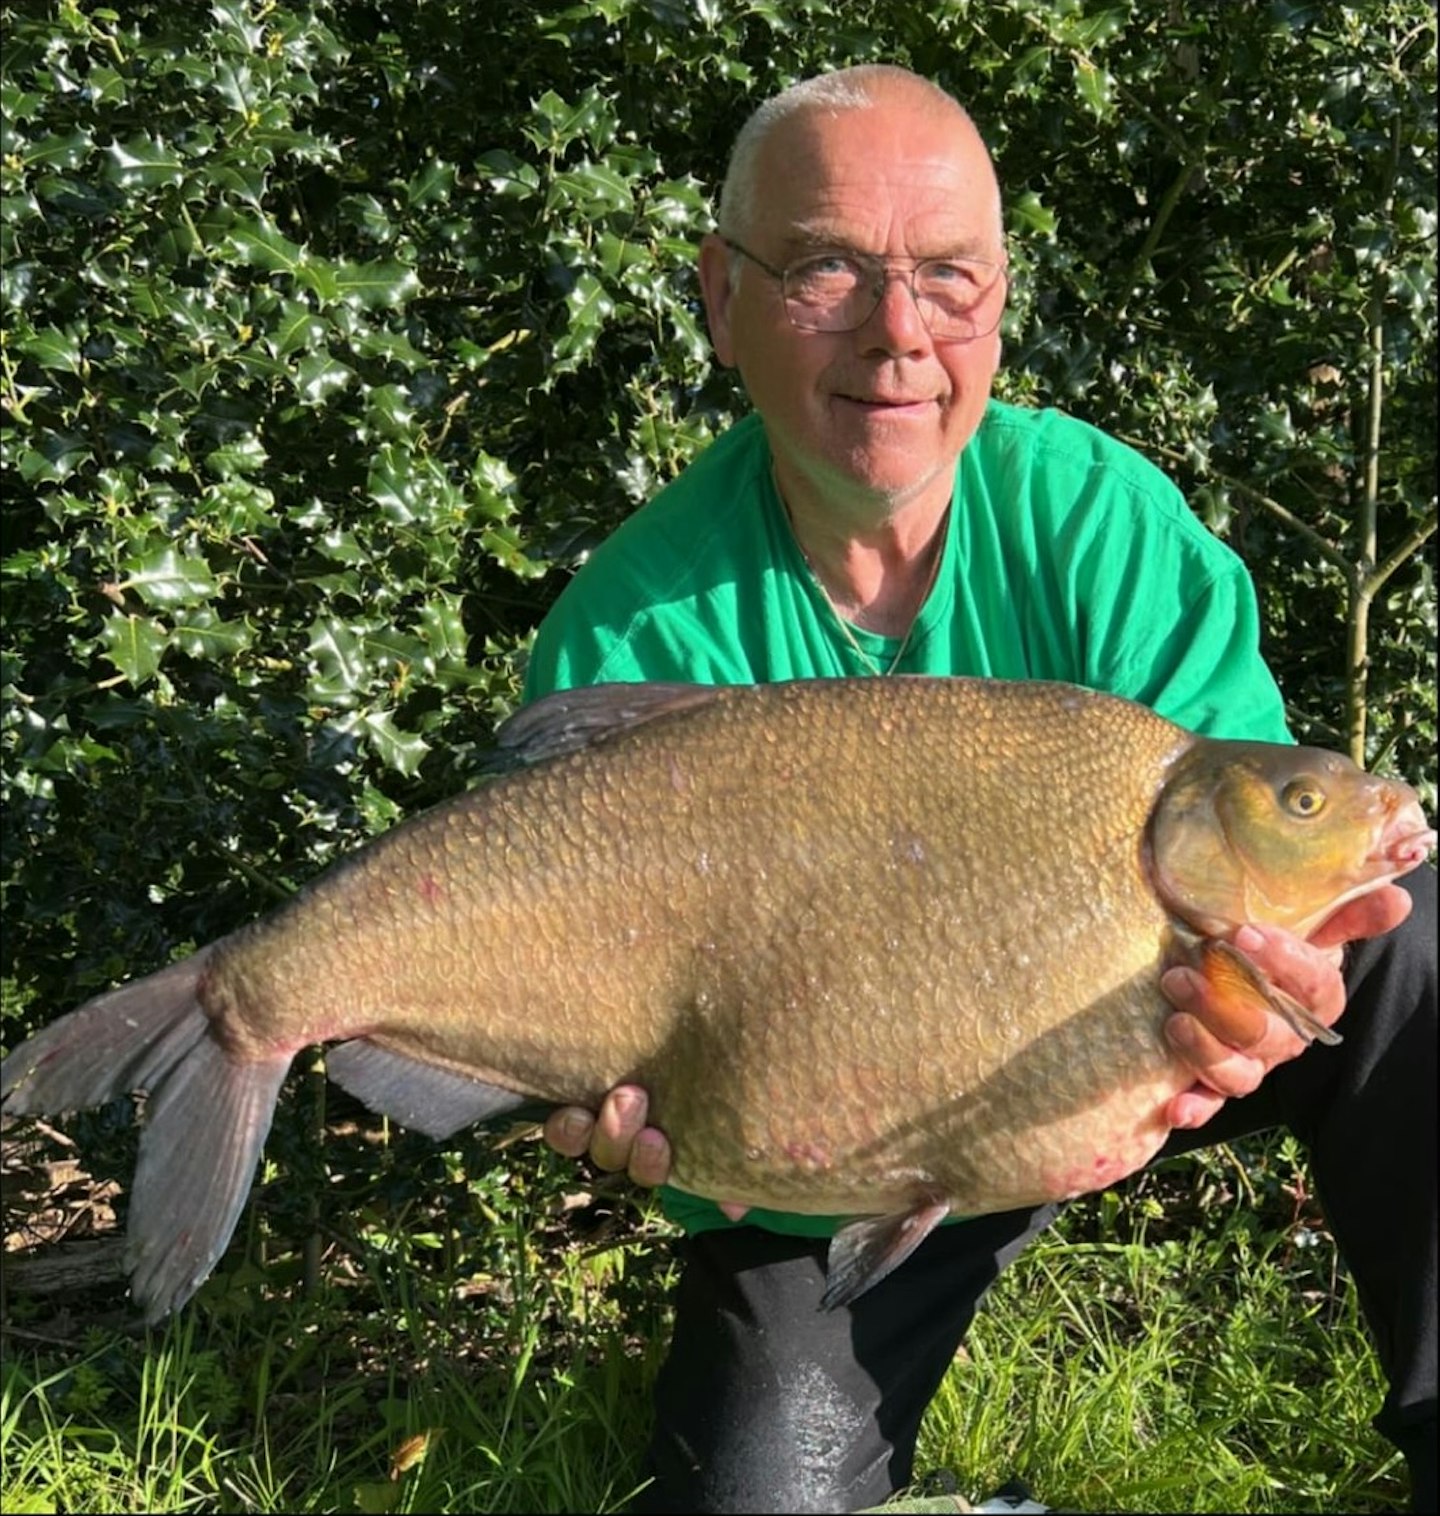 The fish Zen Bojko has been chasing, 18lb 3oz and what a fish it is too!